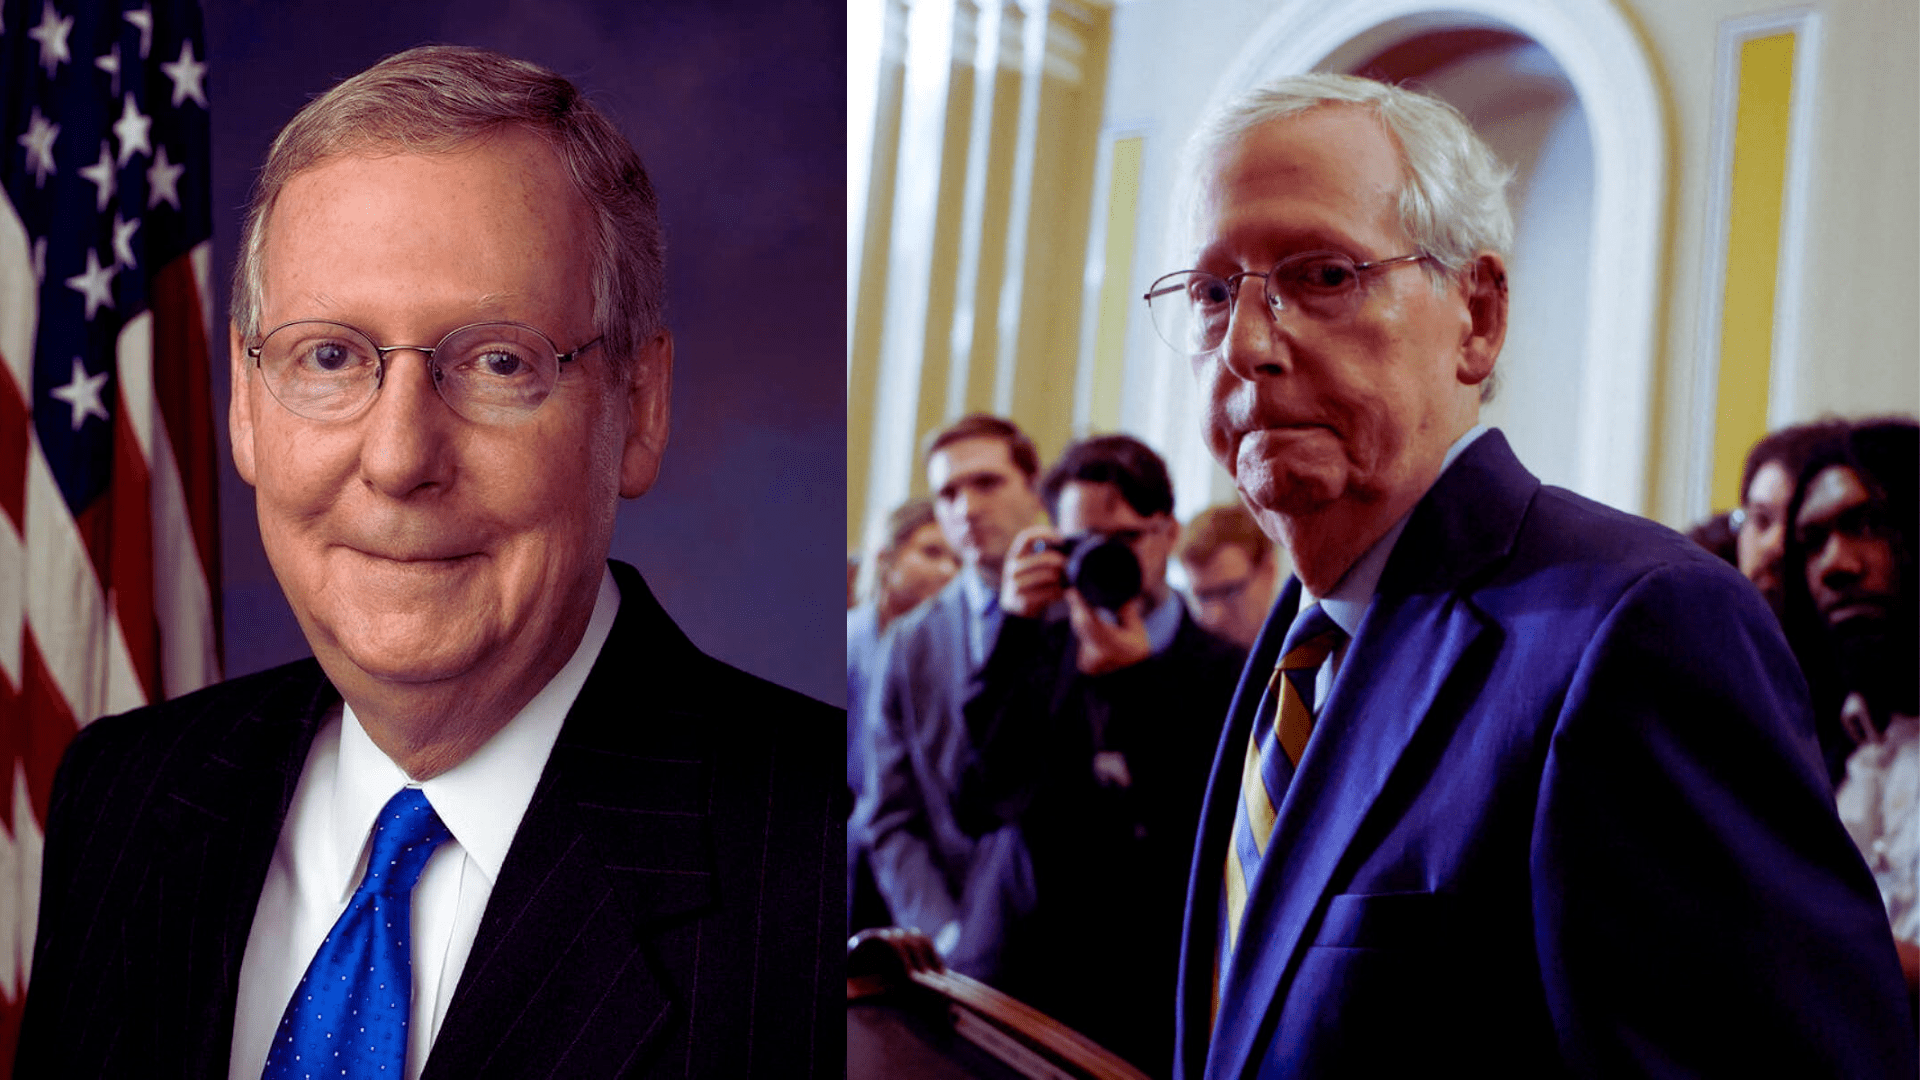 How Old is Mitch McConnell